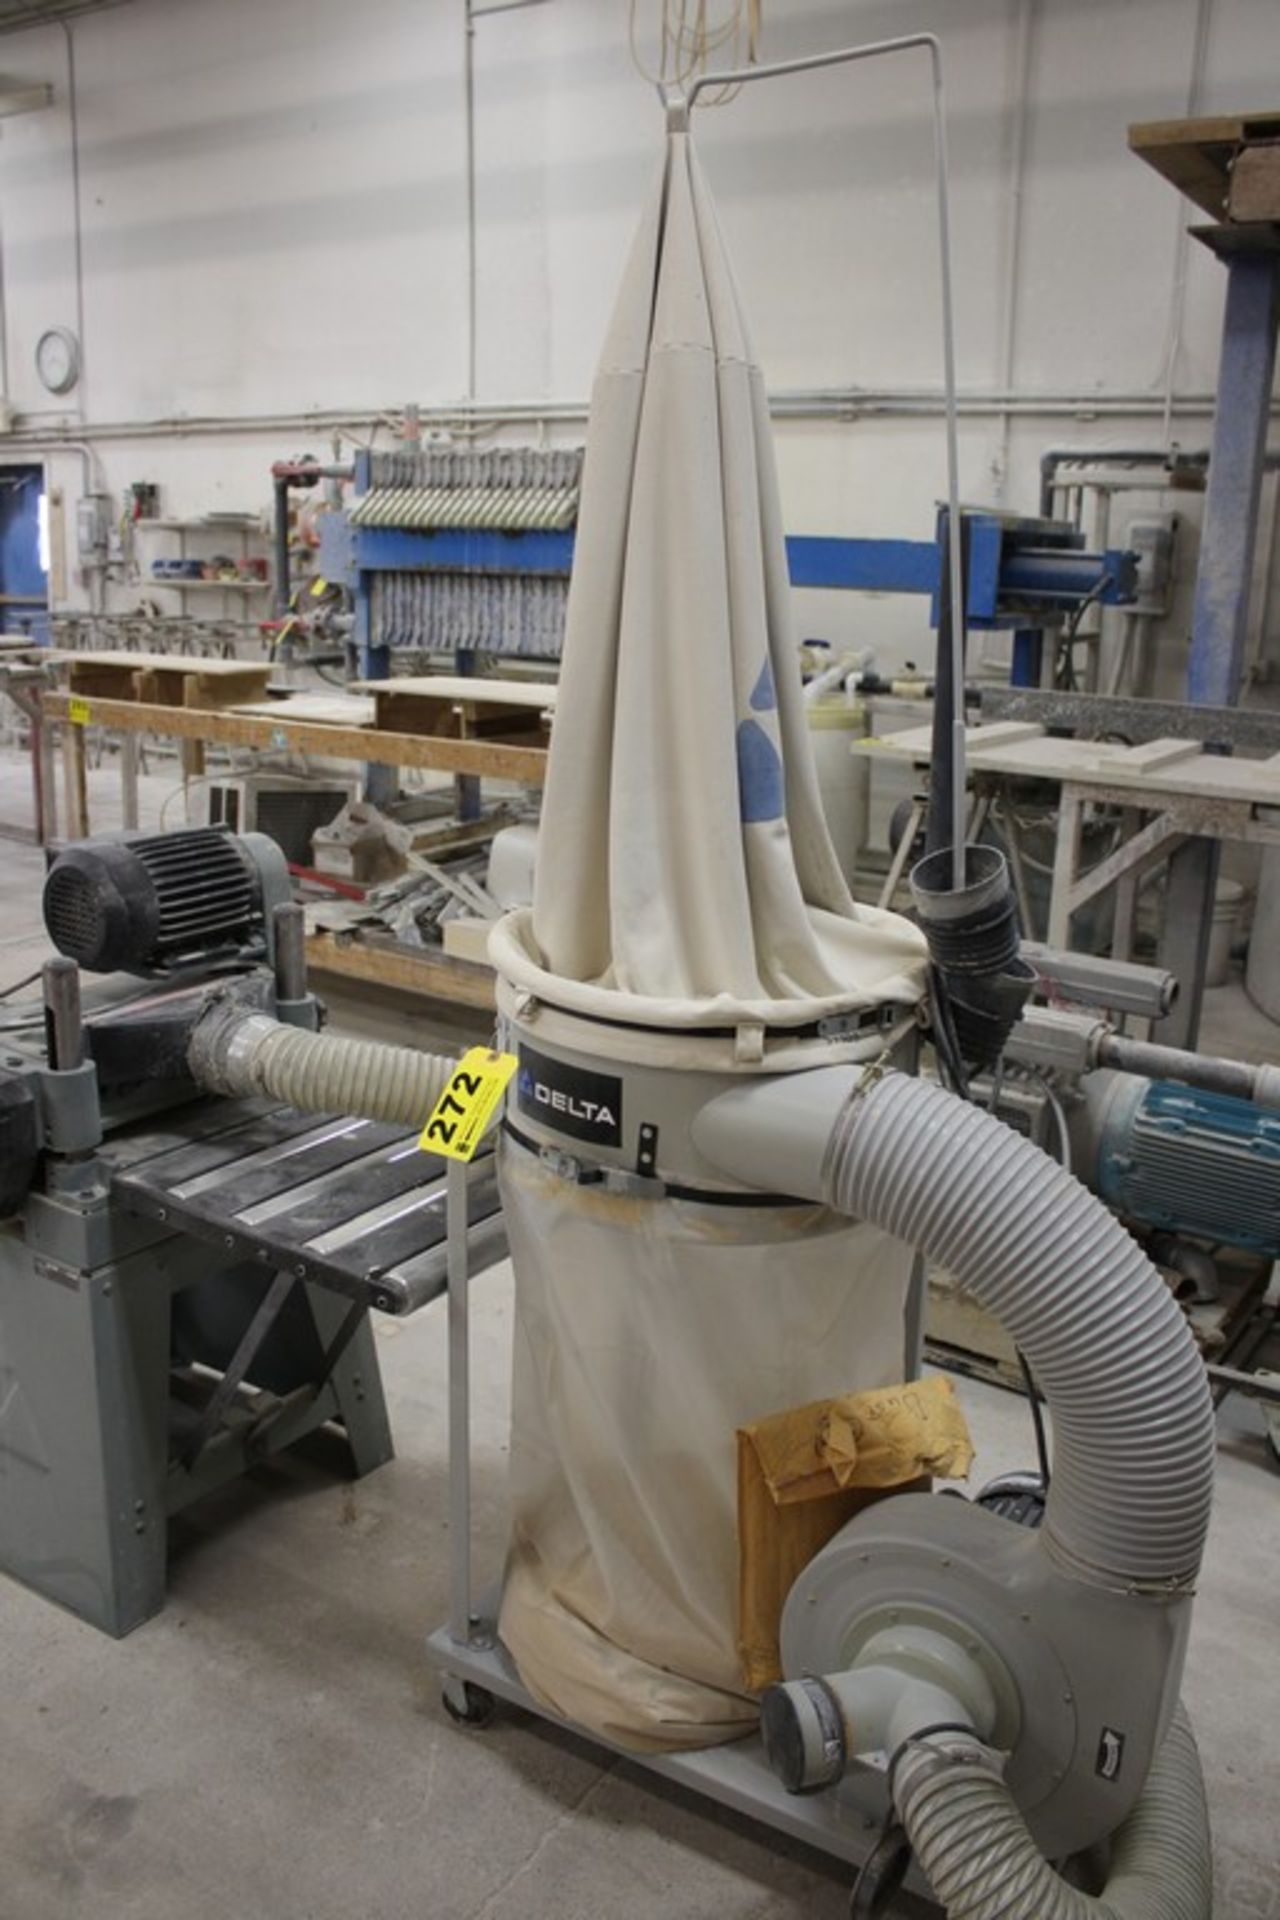 DELTA SINGLE BAG 1 1/2 HP PORTABLE DUST COLLECTOR - Image 2 of 4